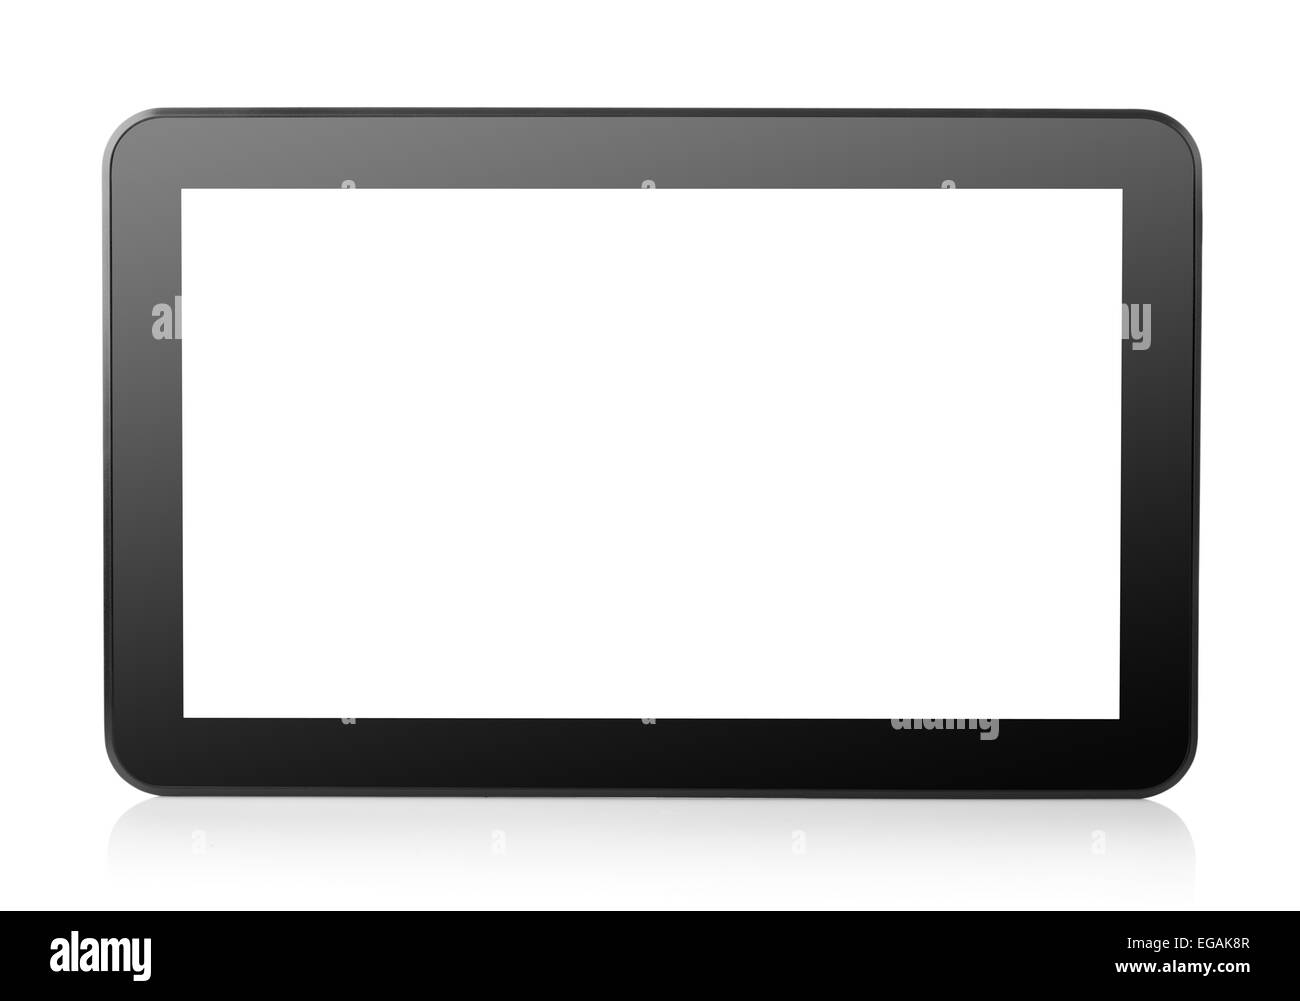 Tablet computer isolated on a white background Stock Photo